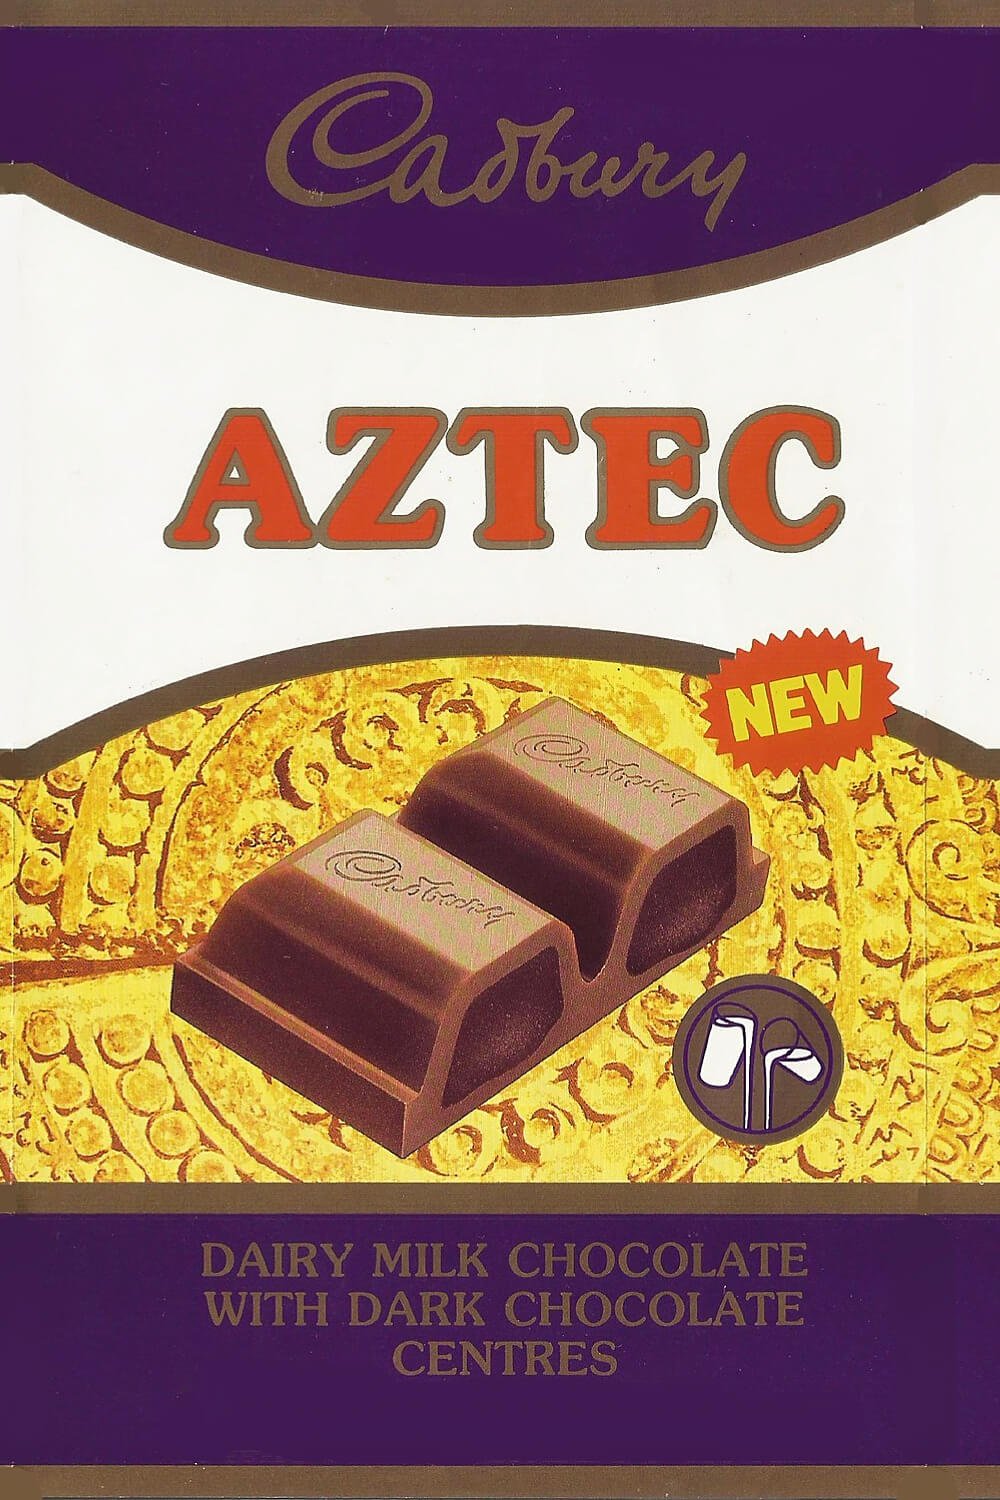 Cadbury Aztec first wrapper design, purple and white with gold text